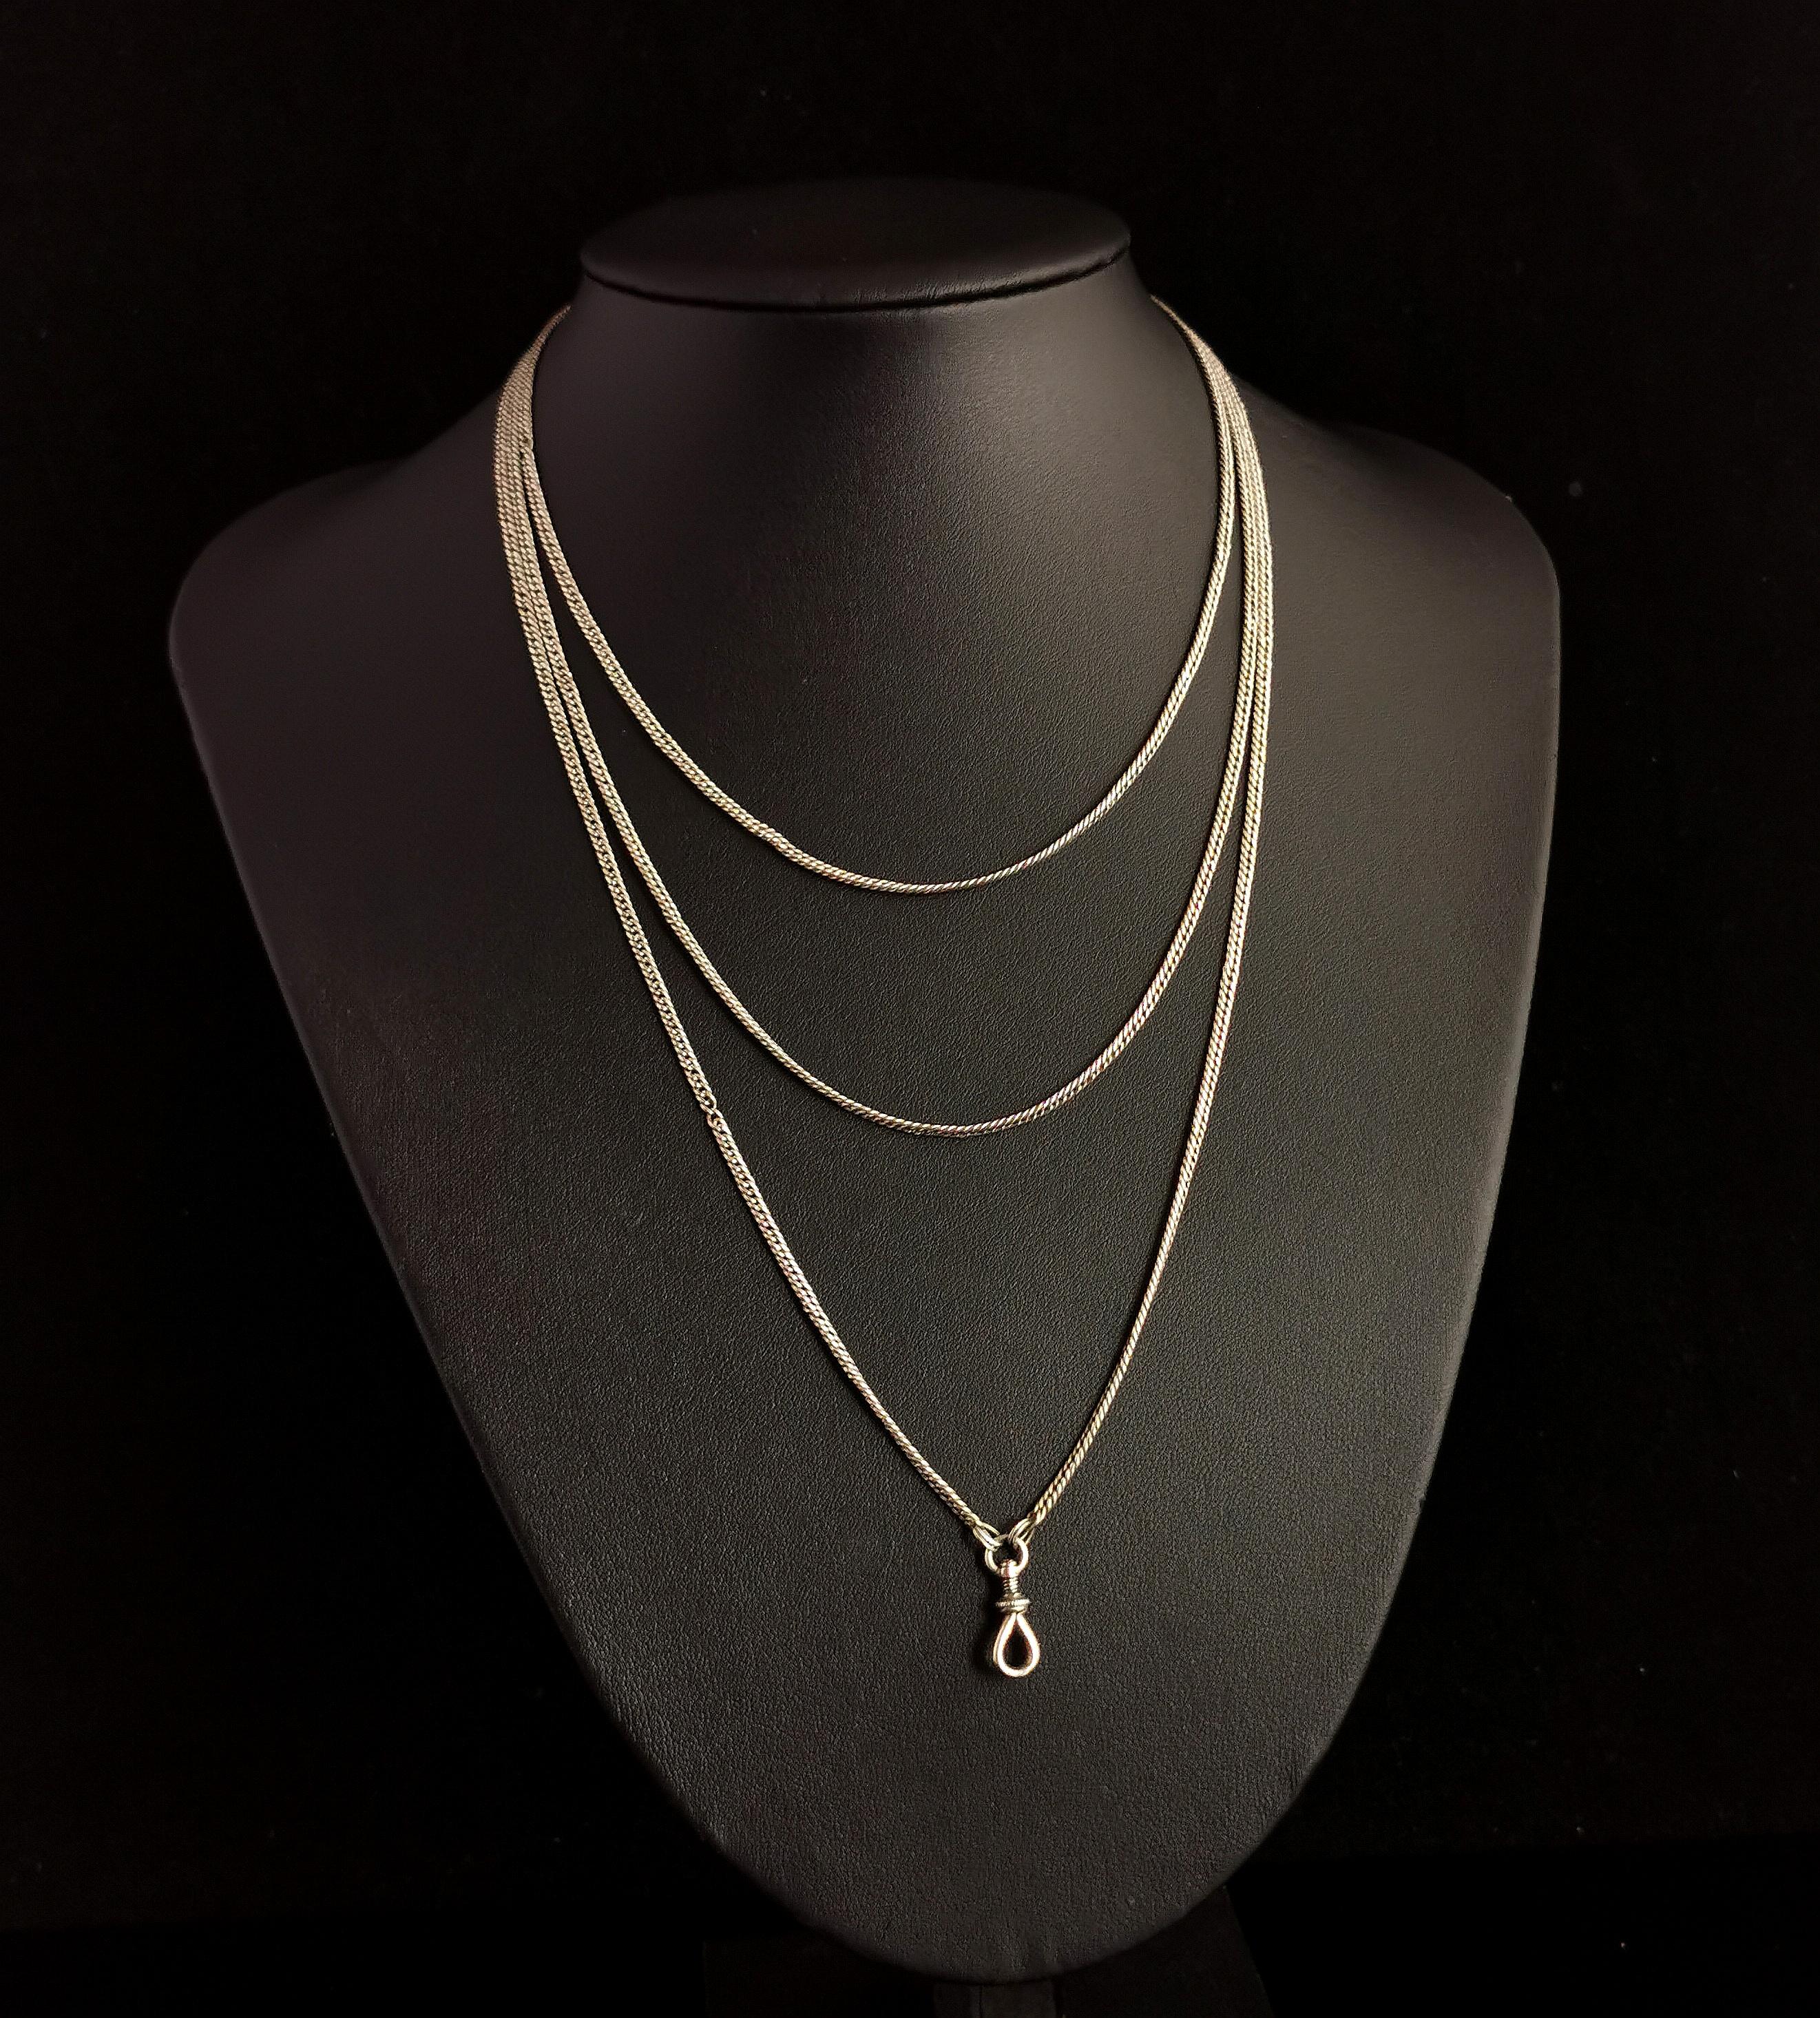 A gorgeous antique silver longuard chain or muff chain necklace.

This is a lovely long length chain at 53